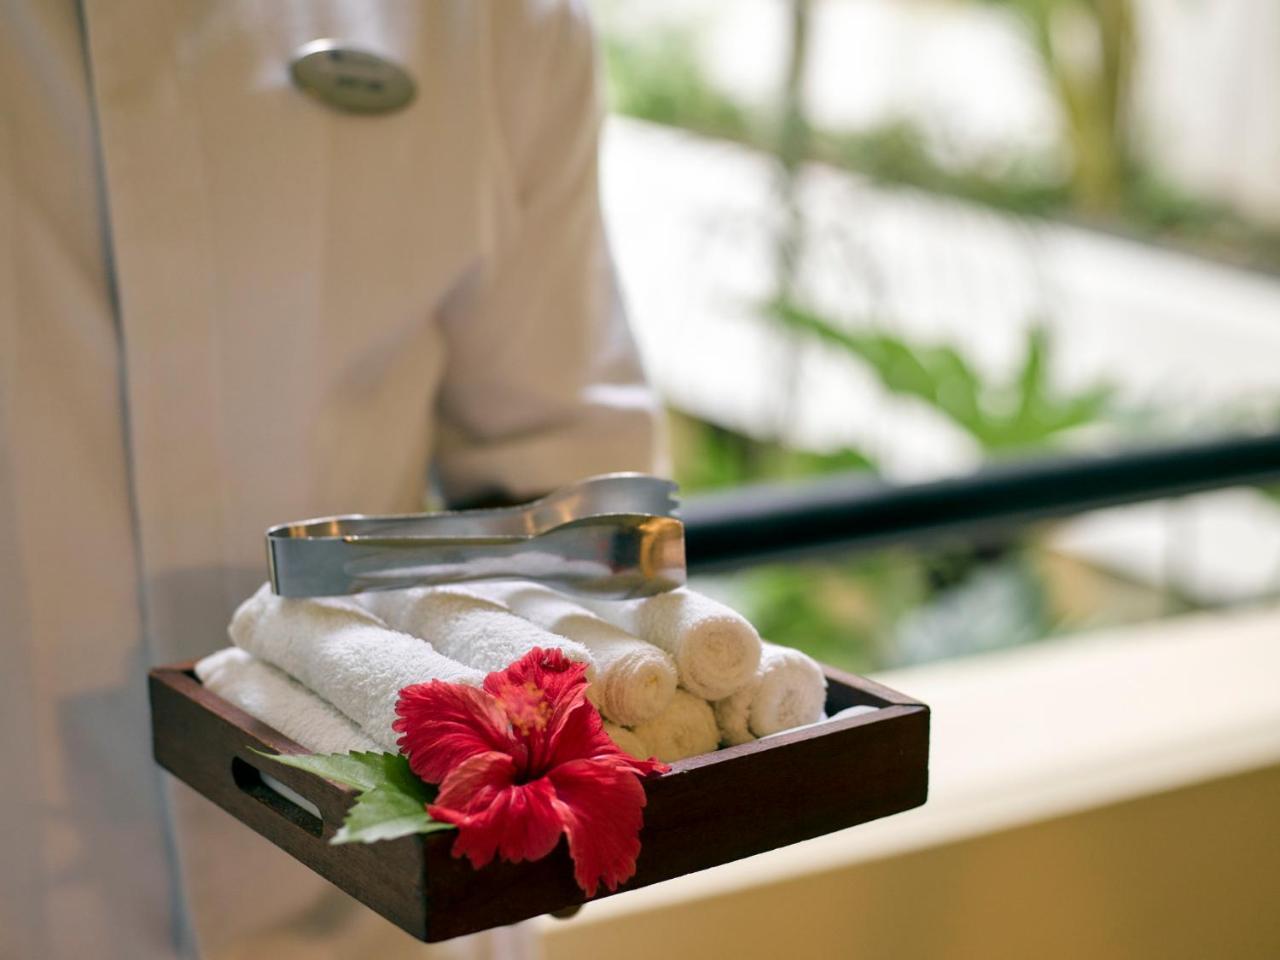 Royal Service At Paradisus By Melia Cancun - Adults Only ภายนอก รูปภาพ